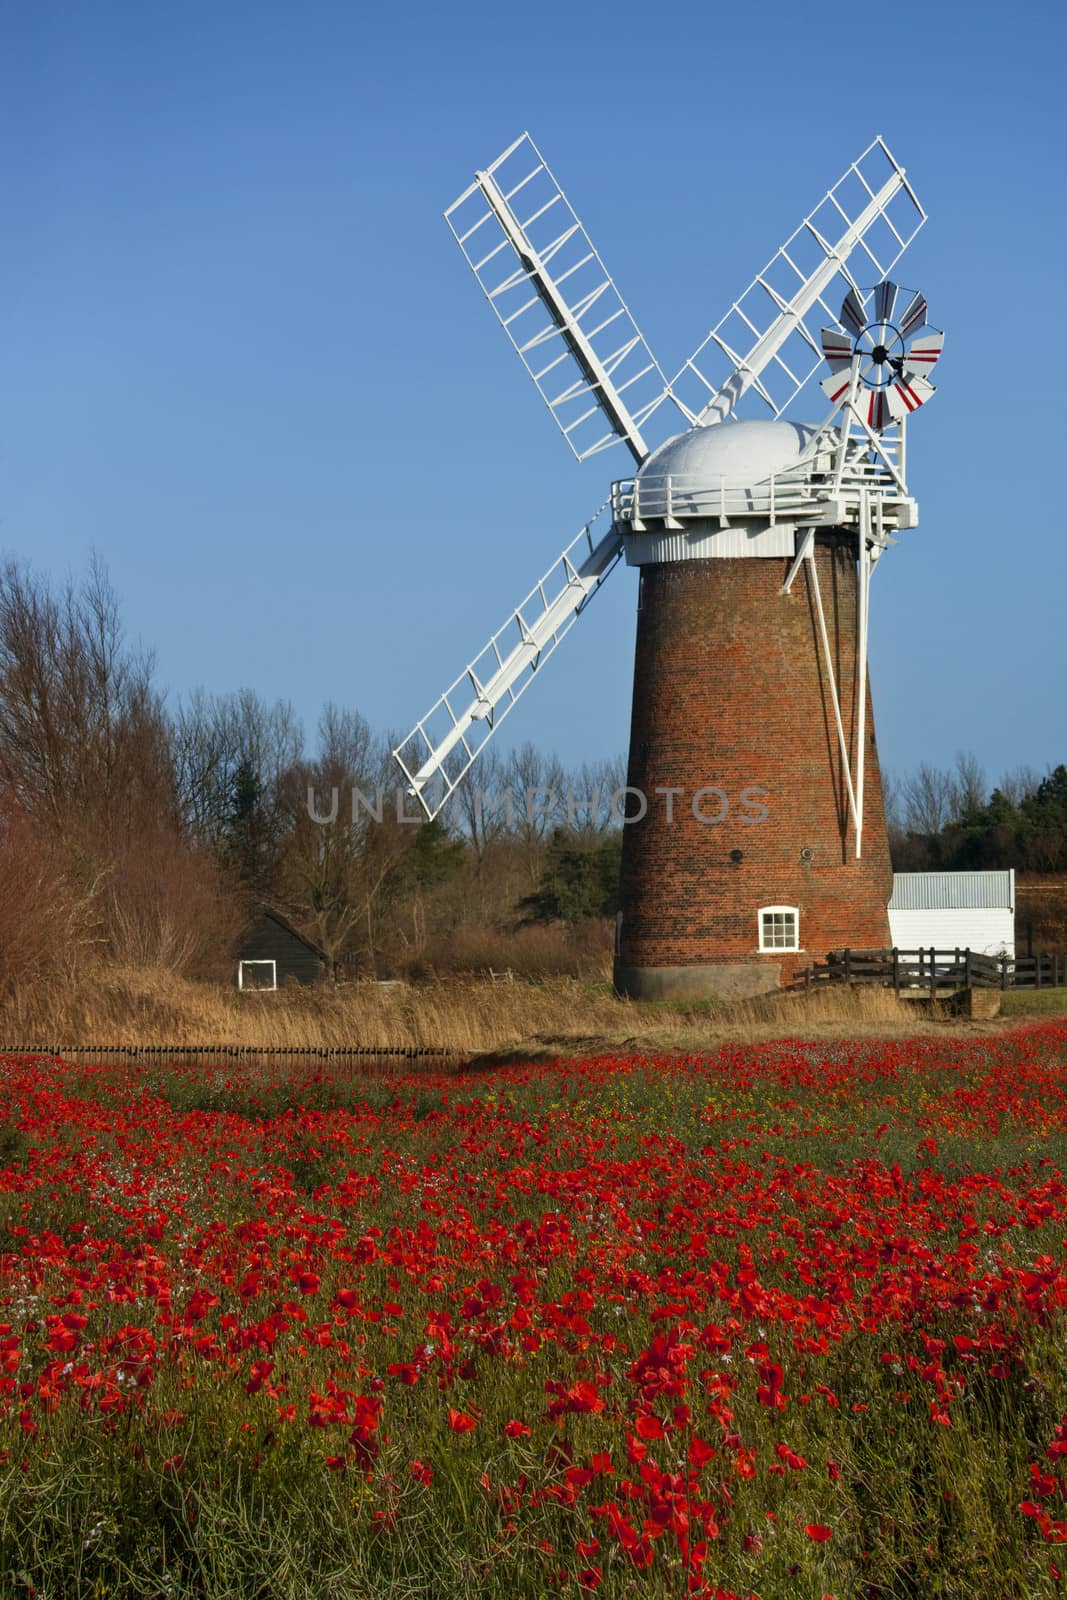 Horsey Windpump on the Horsey Marshes in Norfolk, England. The pump was used to drain the surrounding marsh land as this whole area is prone to flooding. 